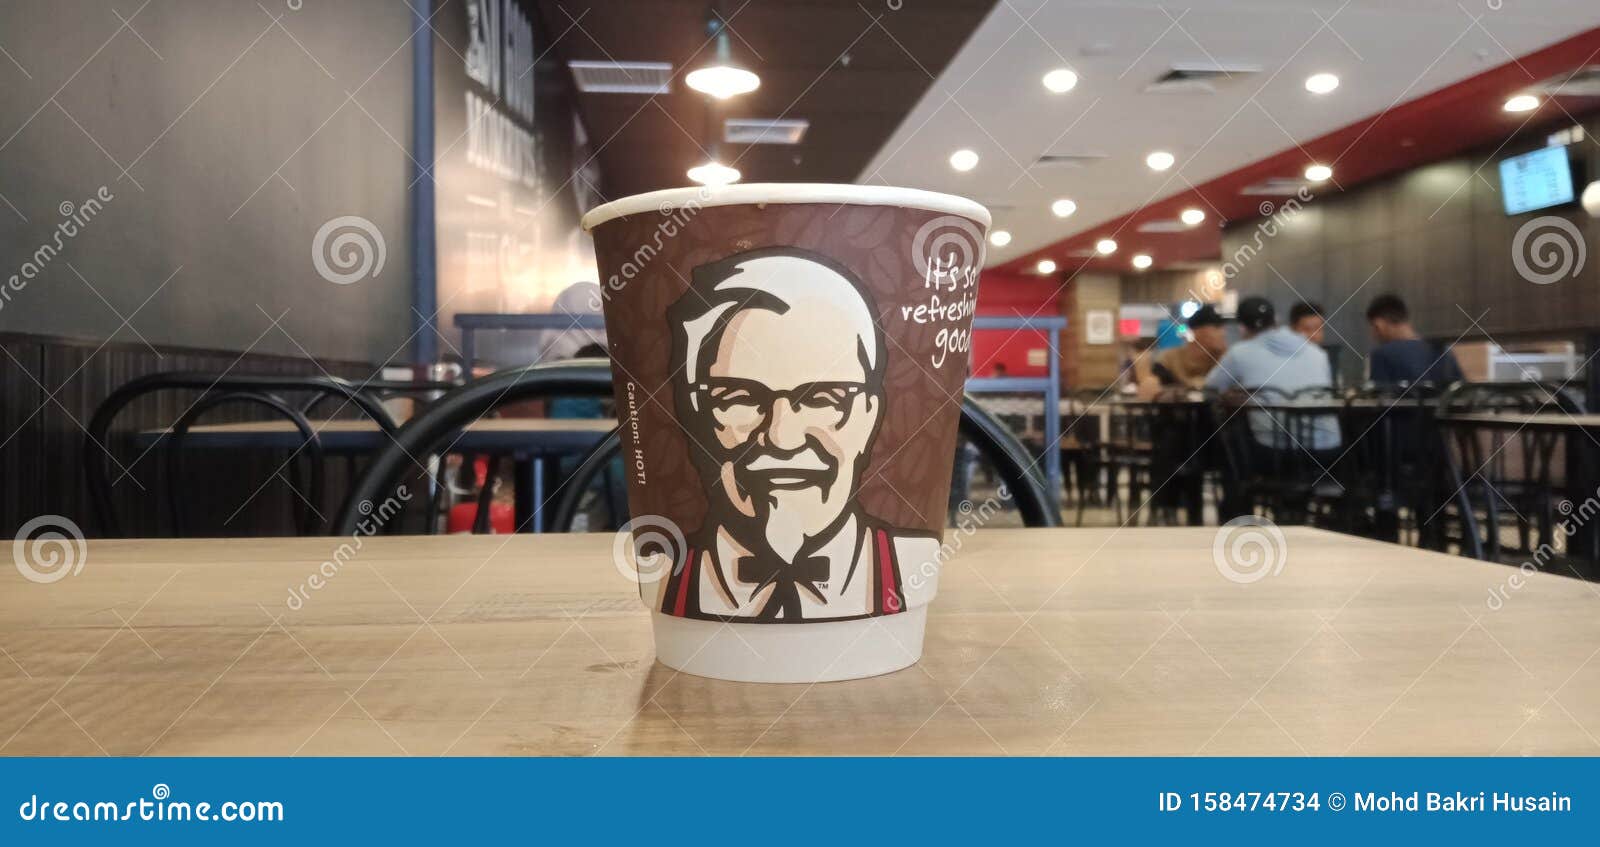 Kfc Cup On The Table Editorial Stock Image Image Of Drink 158474734